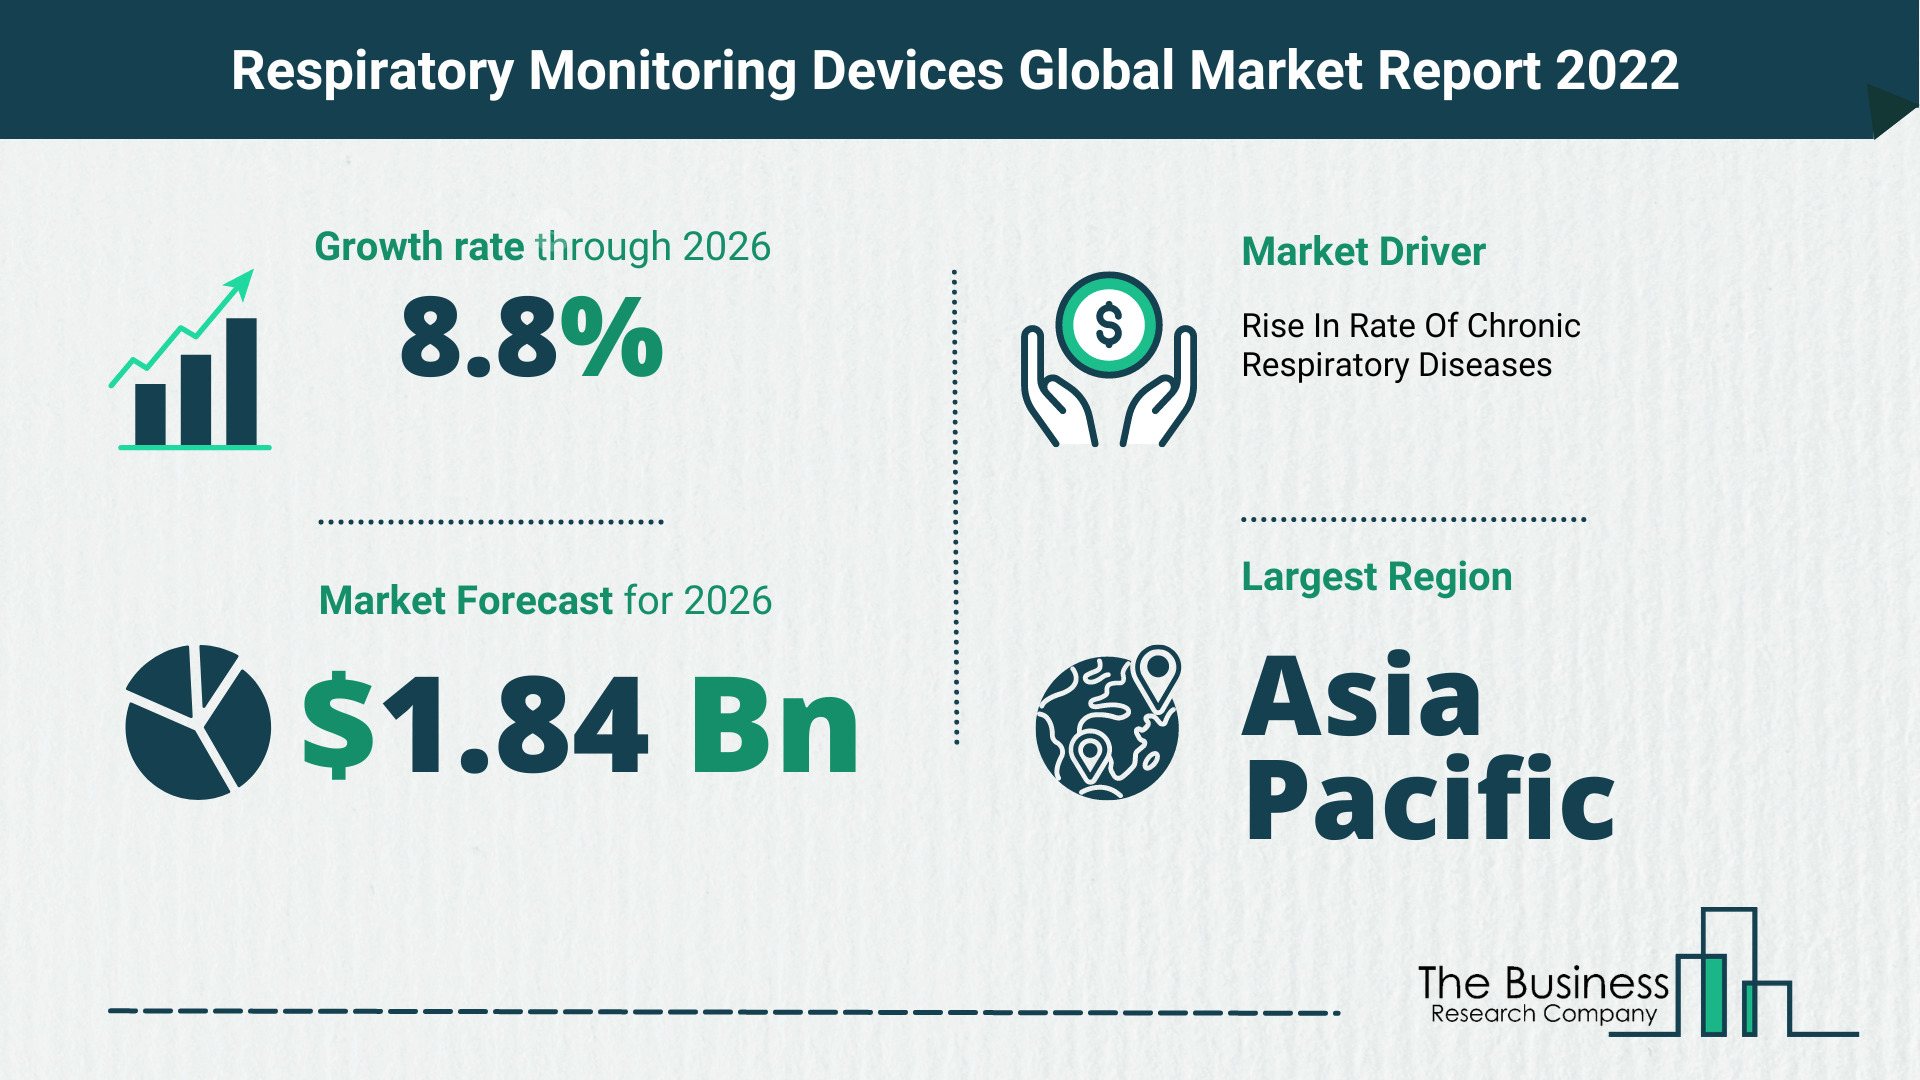 Global Respiratory Monitoring Devices Market